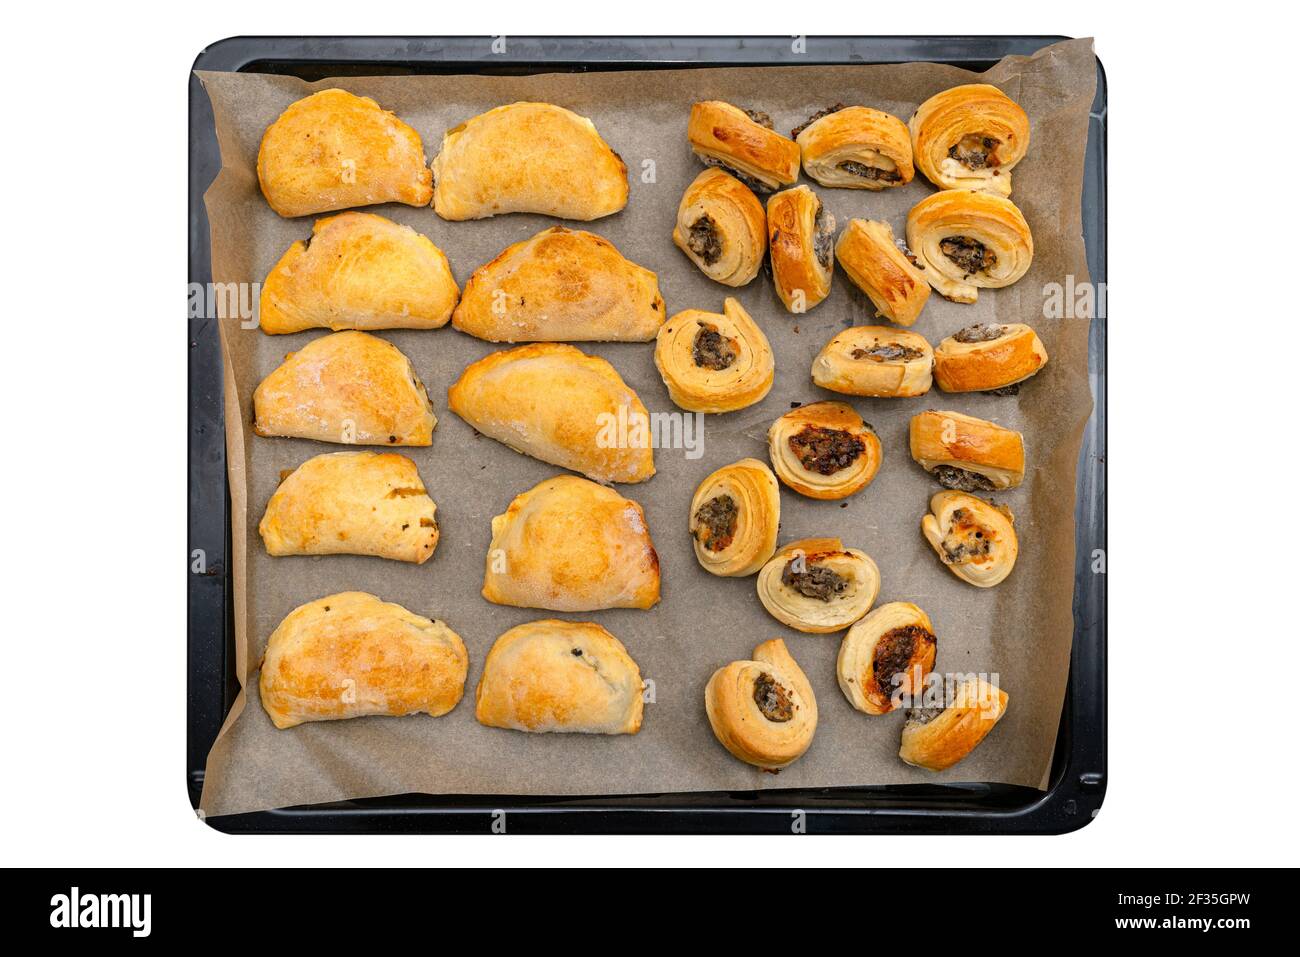 Frozen baked patties and dumplings in dough on a baking sheet on baking paper, isolated on a white background with a clipping path, top view. Stock Photo